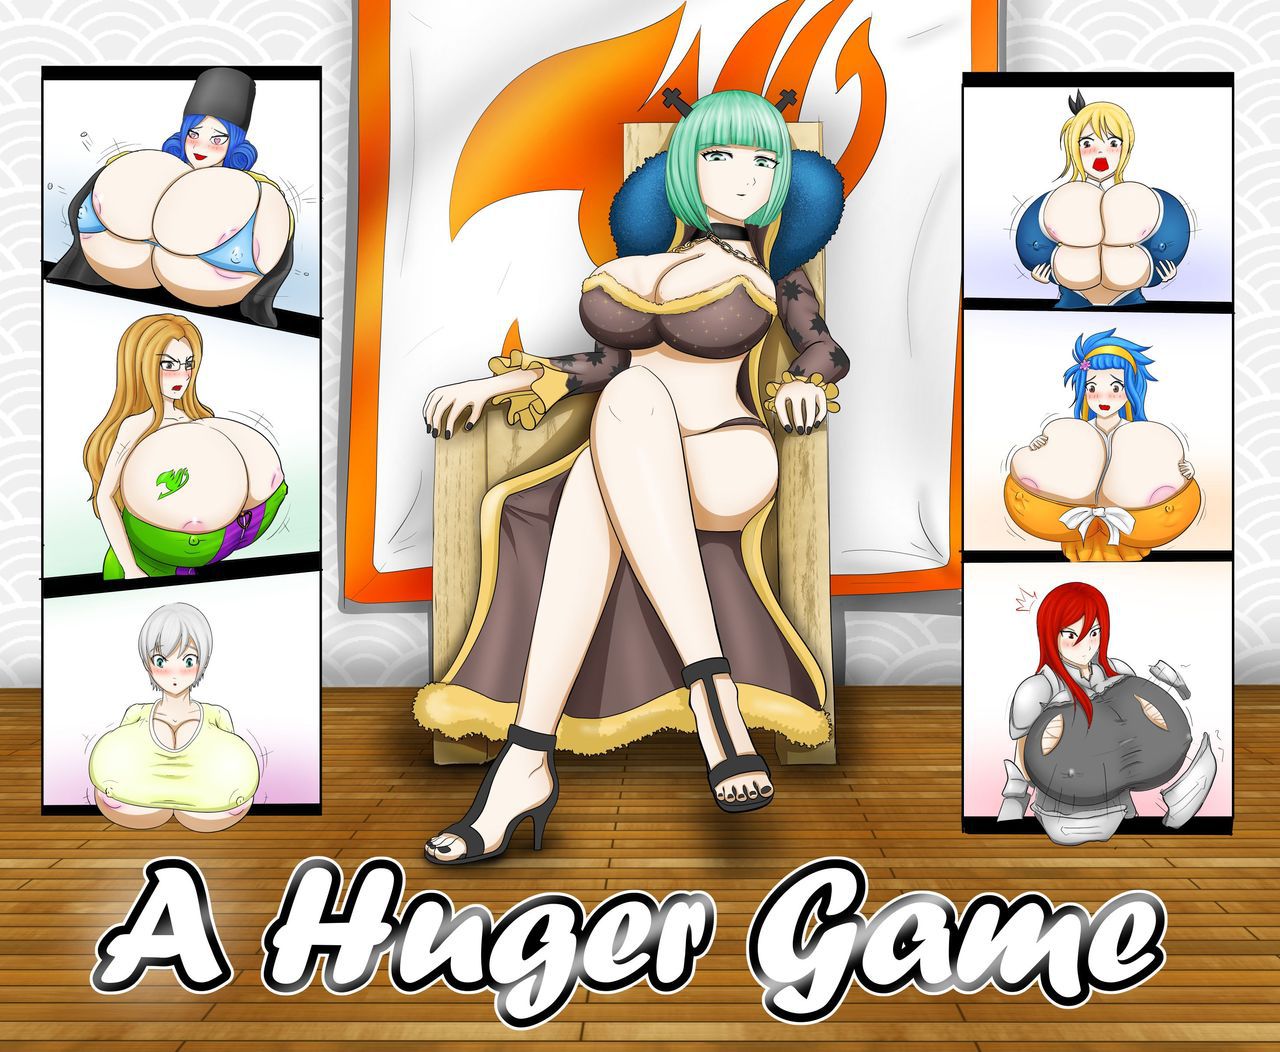 [EscapeFromExpansion] A Huger Game (Fairy Tail) [FRENCH] 1